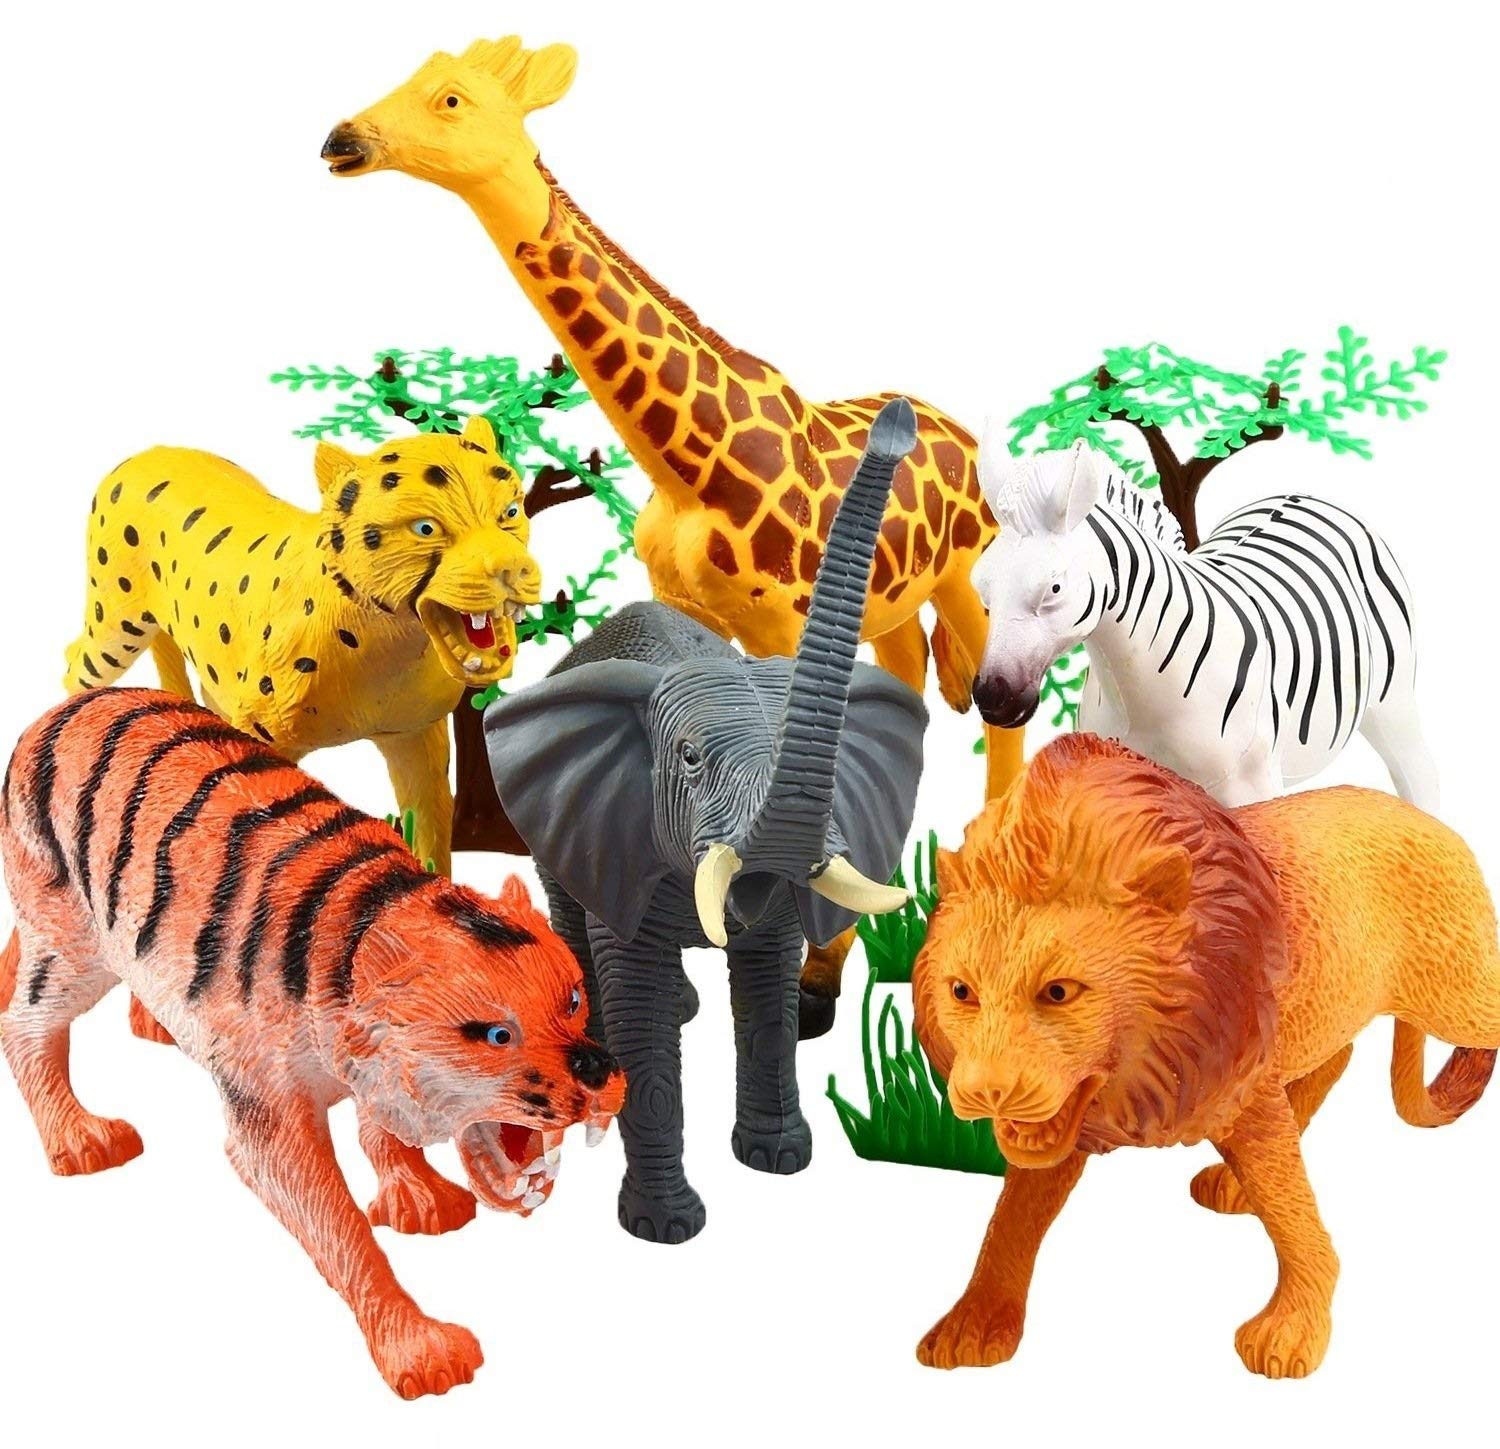 Jgg Rubber Realistically Wild Animal Figurine Toys - Plastic Animal Toy , HD Wallpaper & Backgrounds